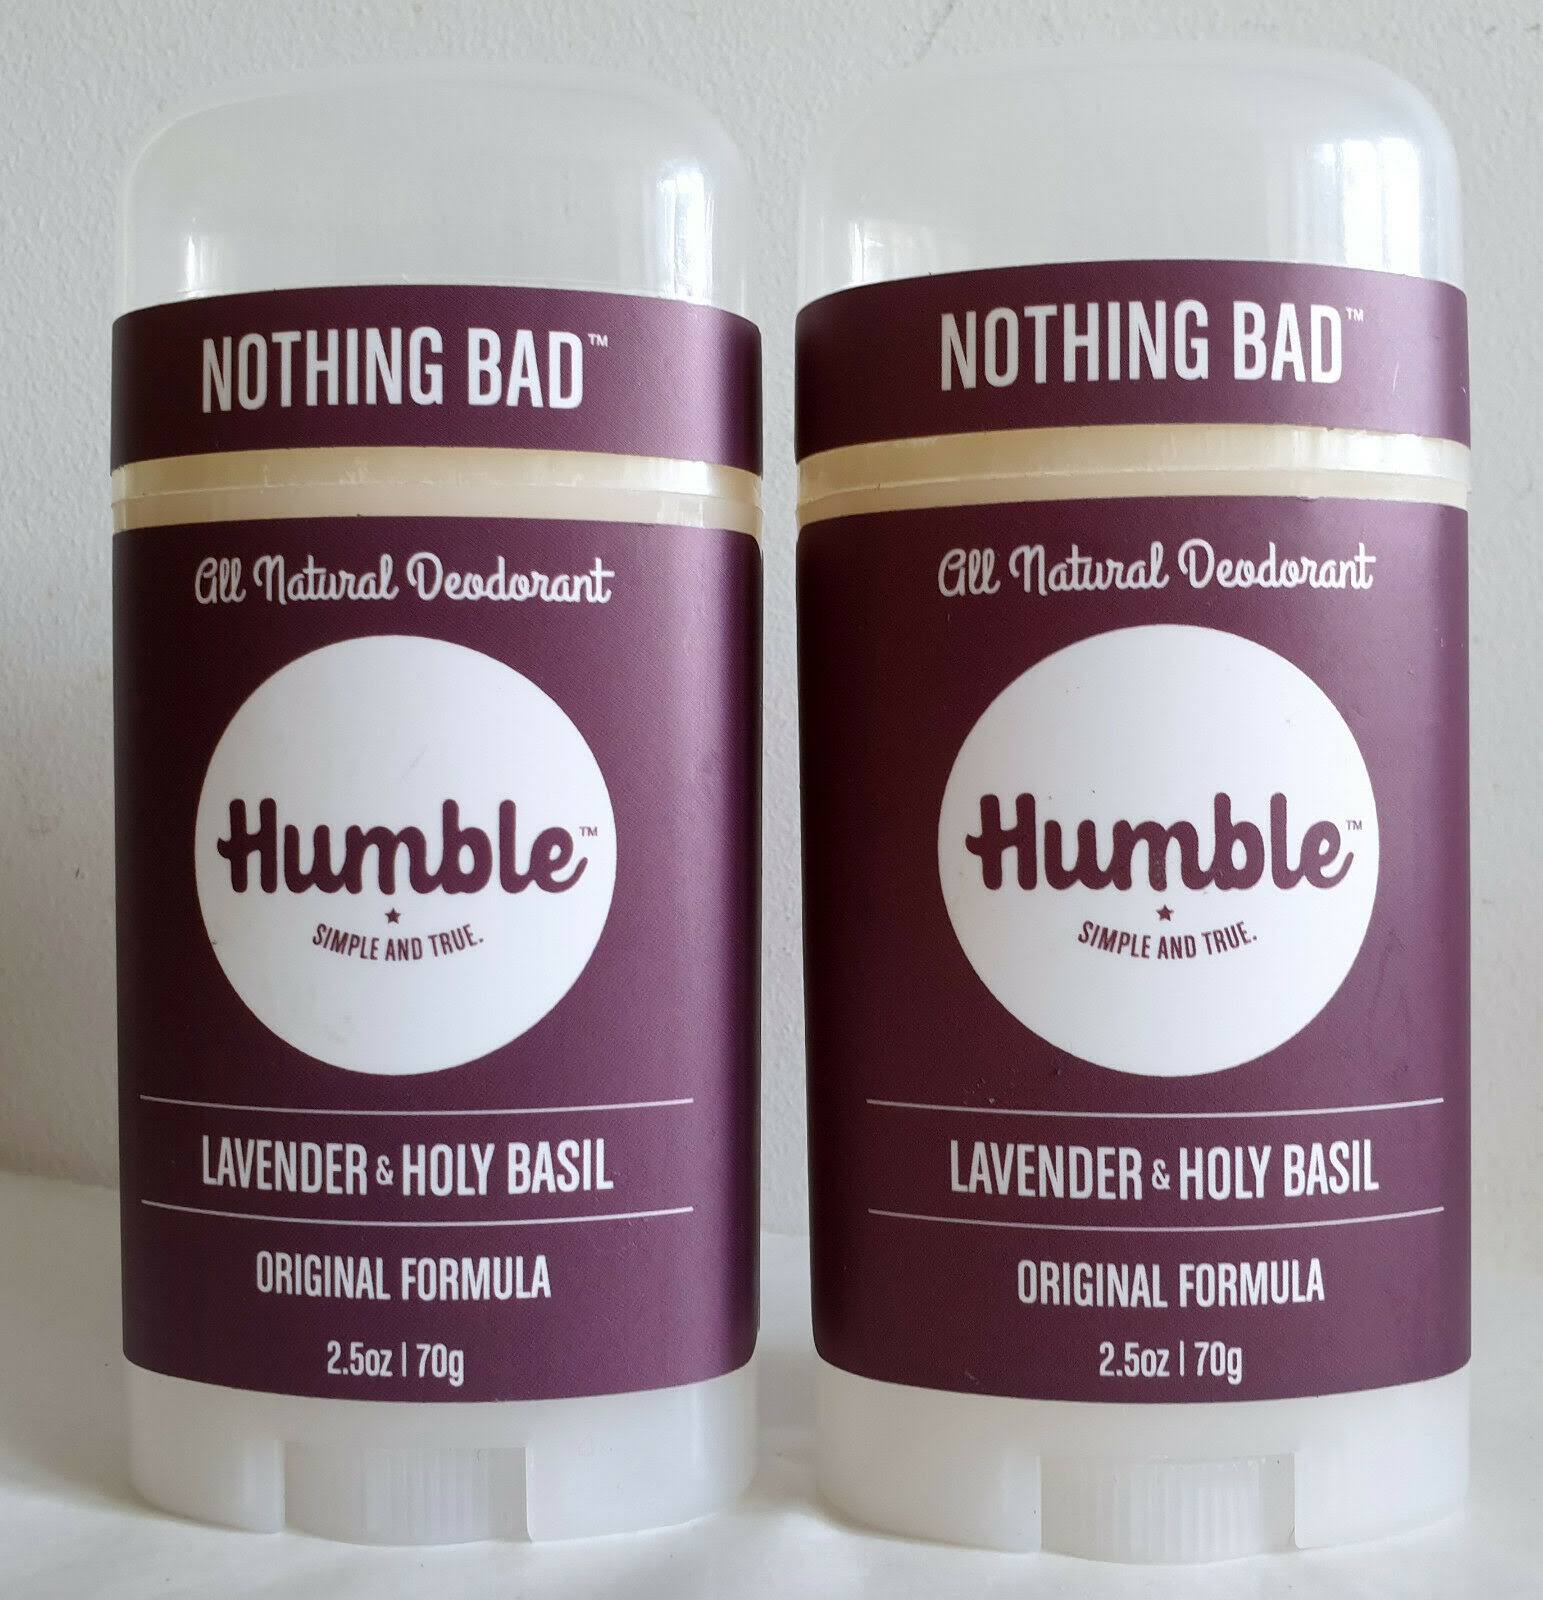 Humble Brands, Inc. All Natural Deodorant - Essential Lavender and Holy Basil, 2.5oz